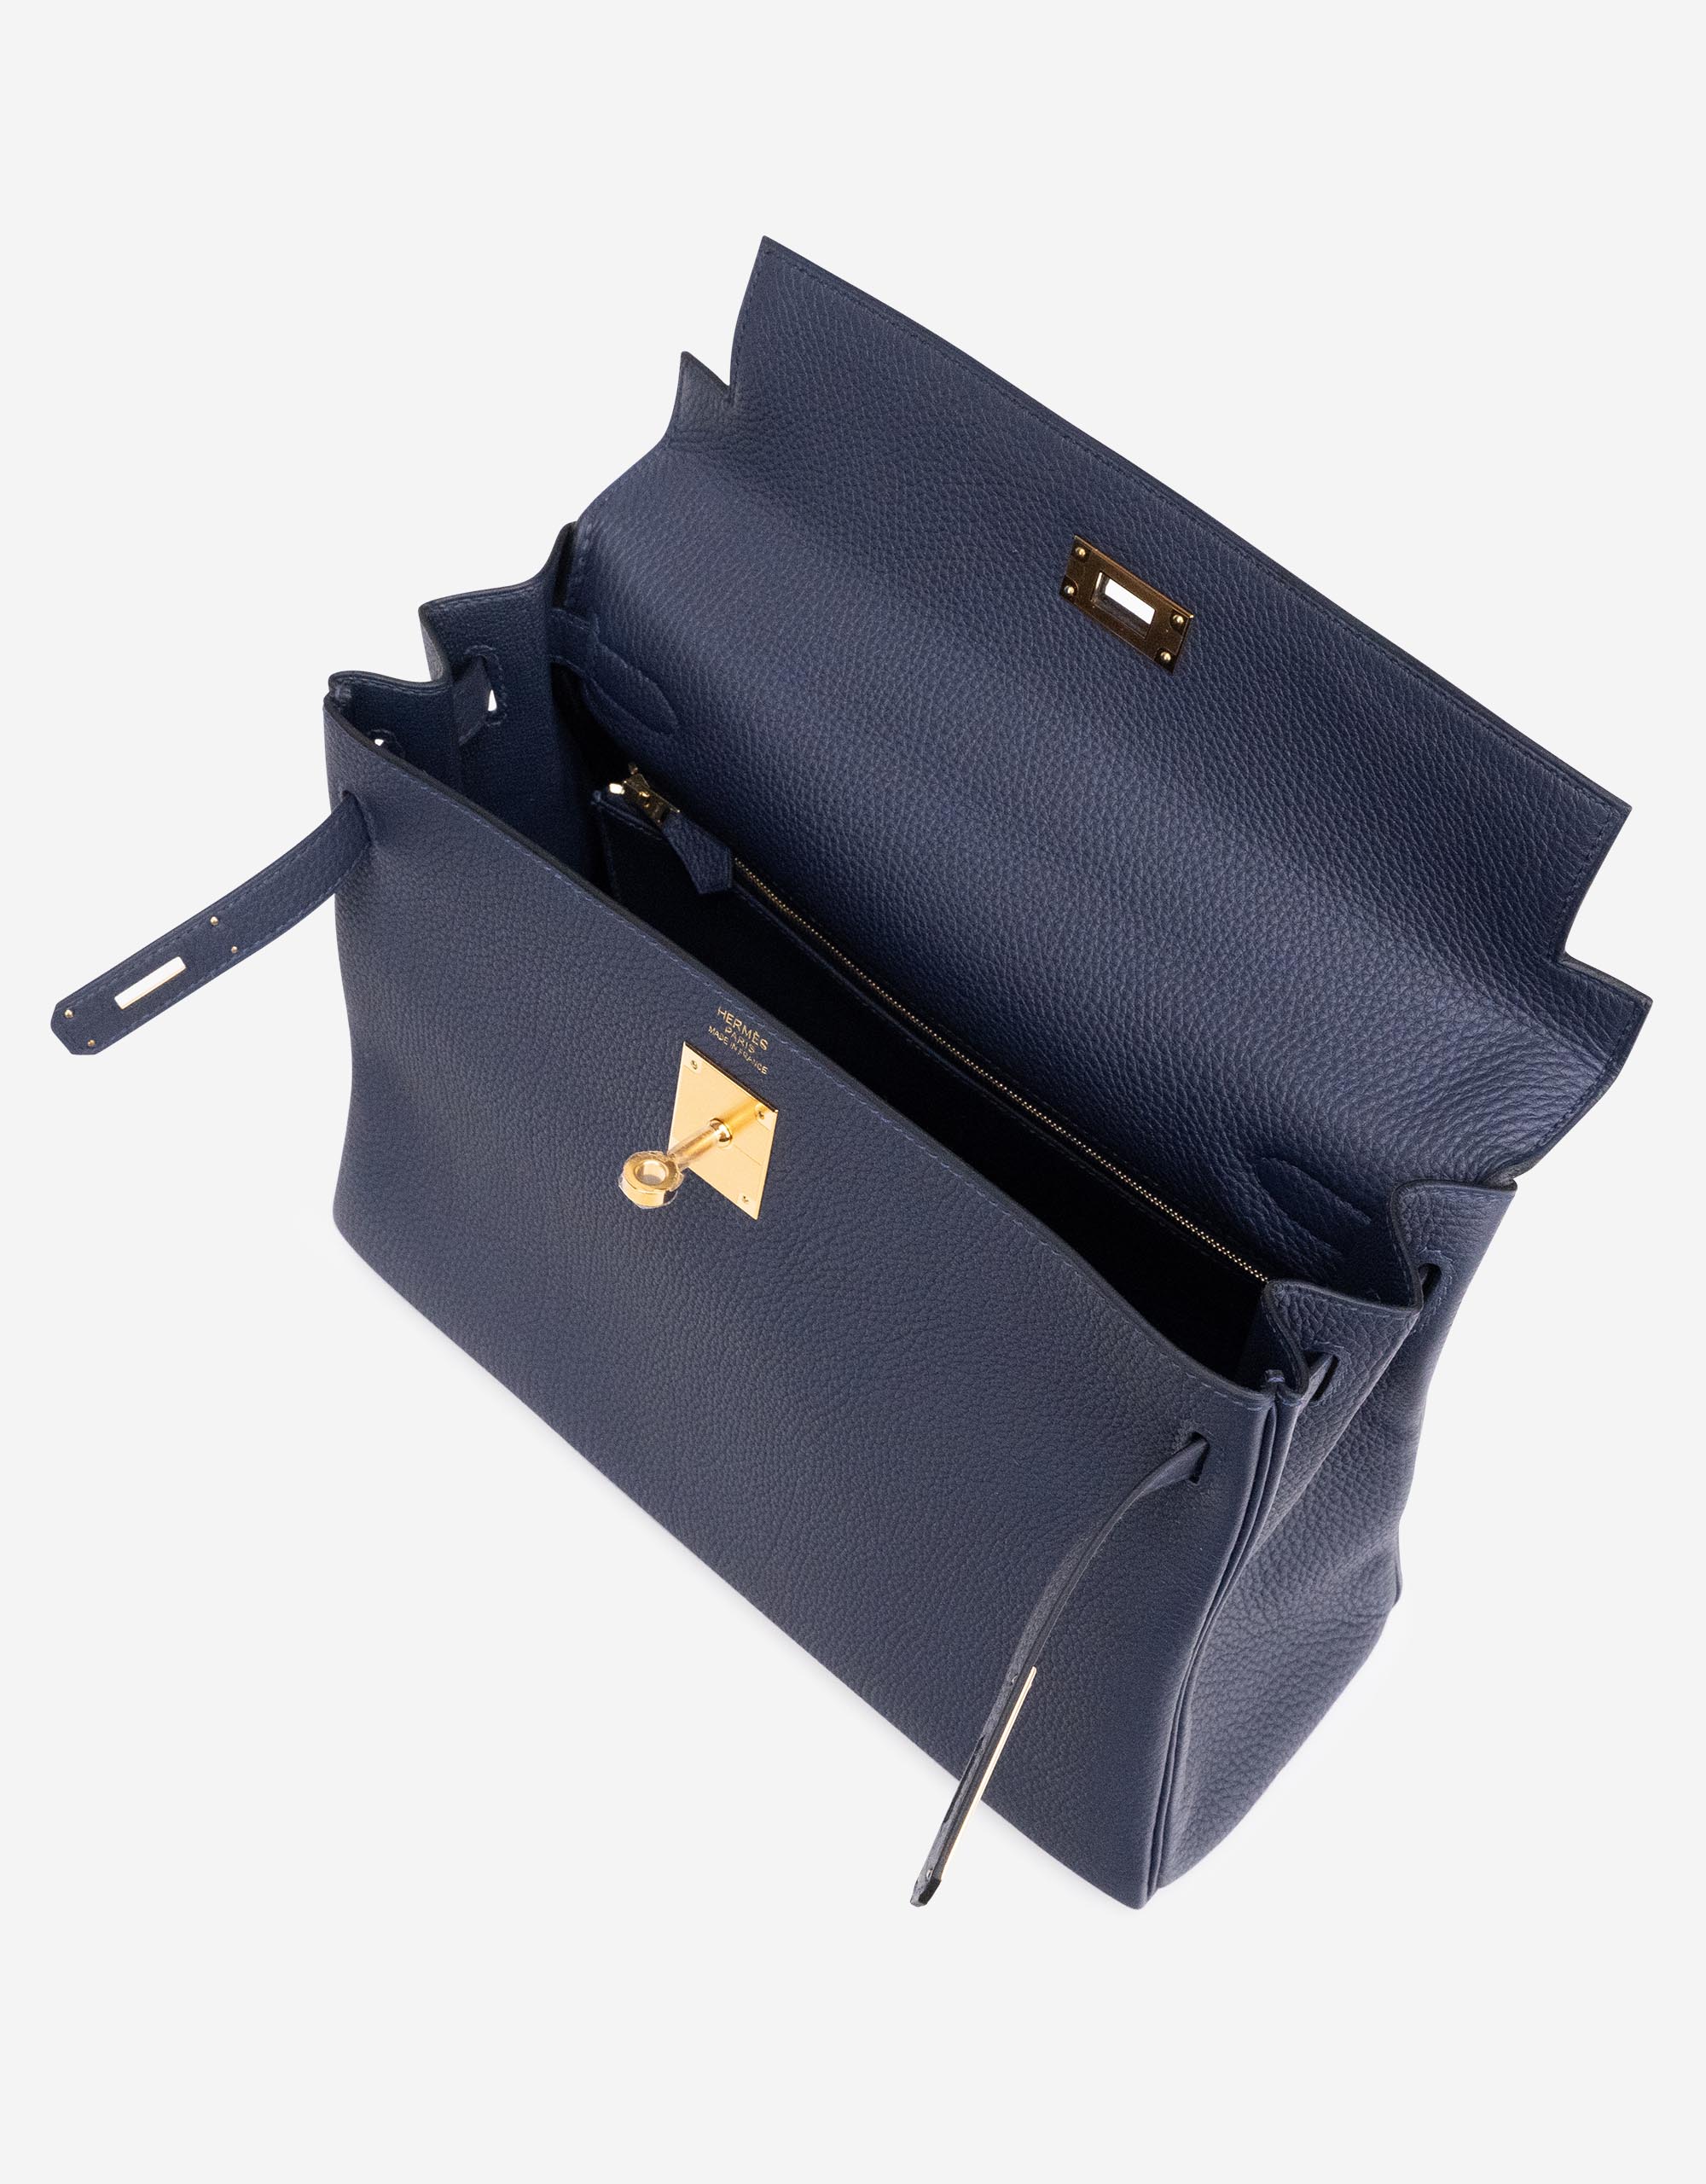 Kelly 25 Bleu Nuit in Togo Leather with Gold Hardware – Diamonds